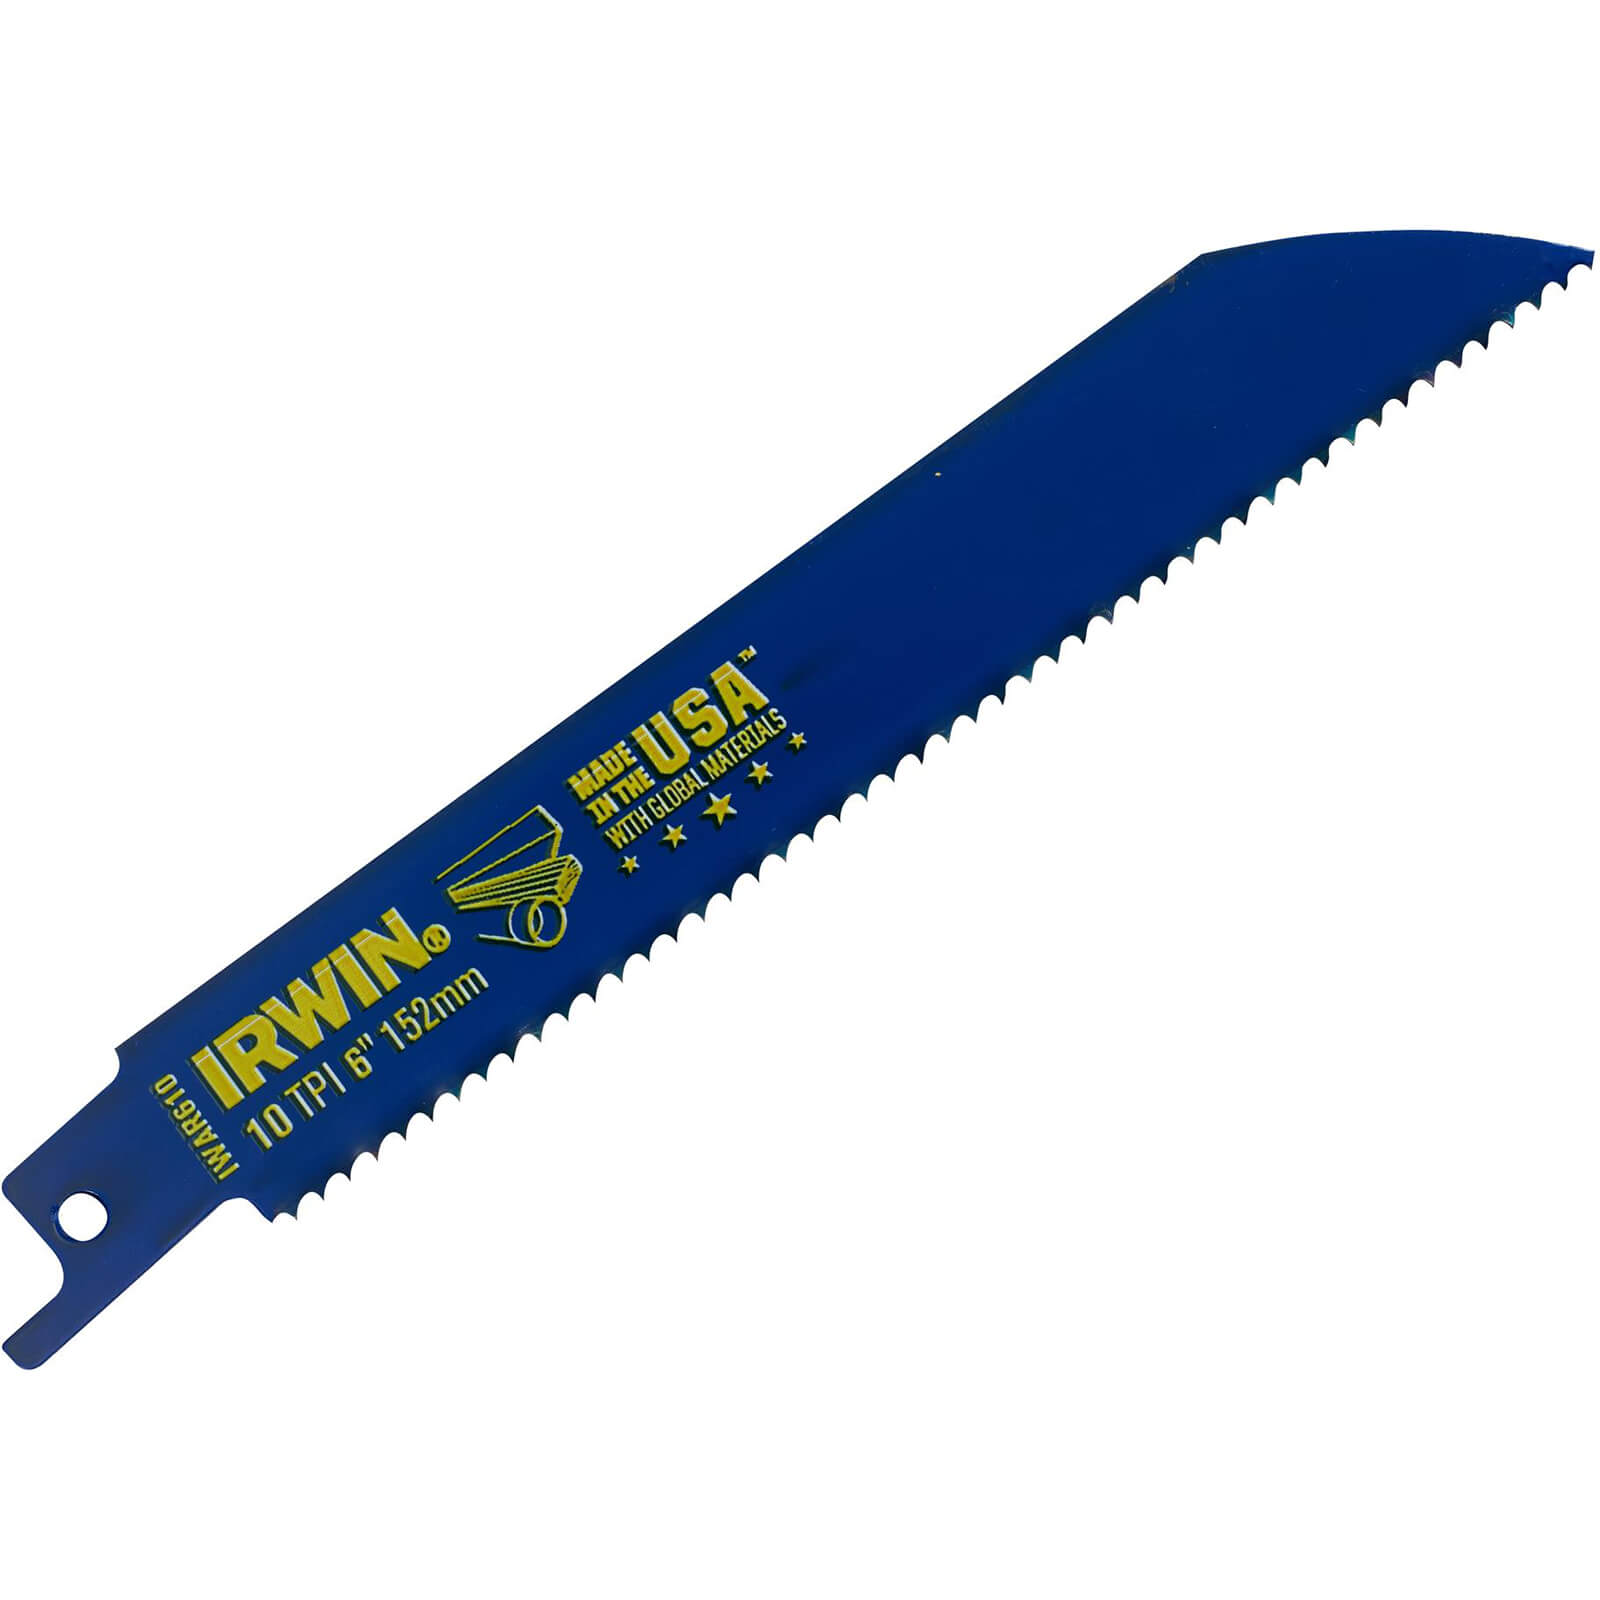 Photos - Power Tool Accessory IRWIN 610R Reciprocating Saw Blades for Wood and Metal 150mm Pack of 2 105 